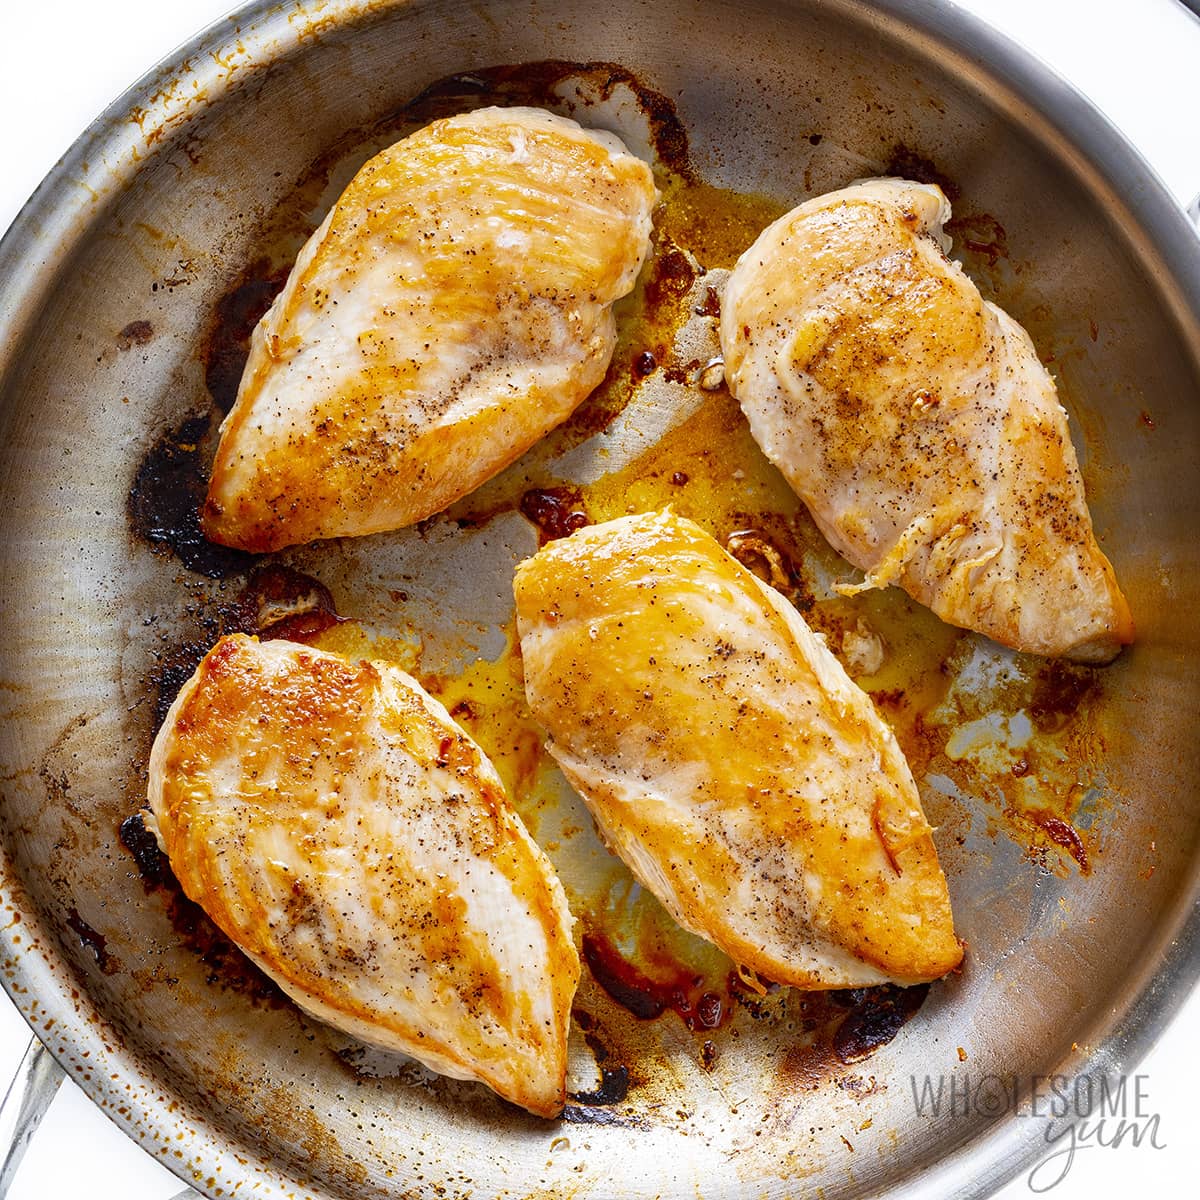 Chicken breasts seared in skillet.